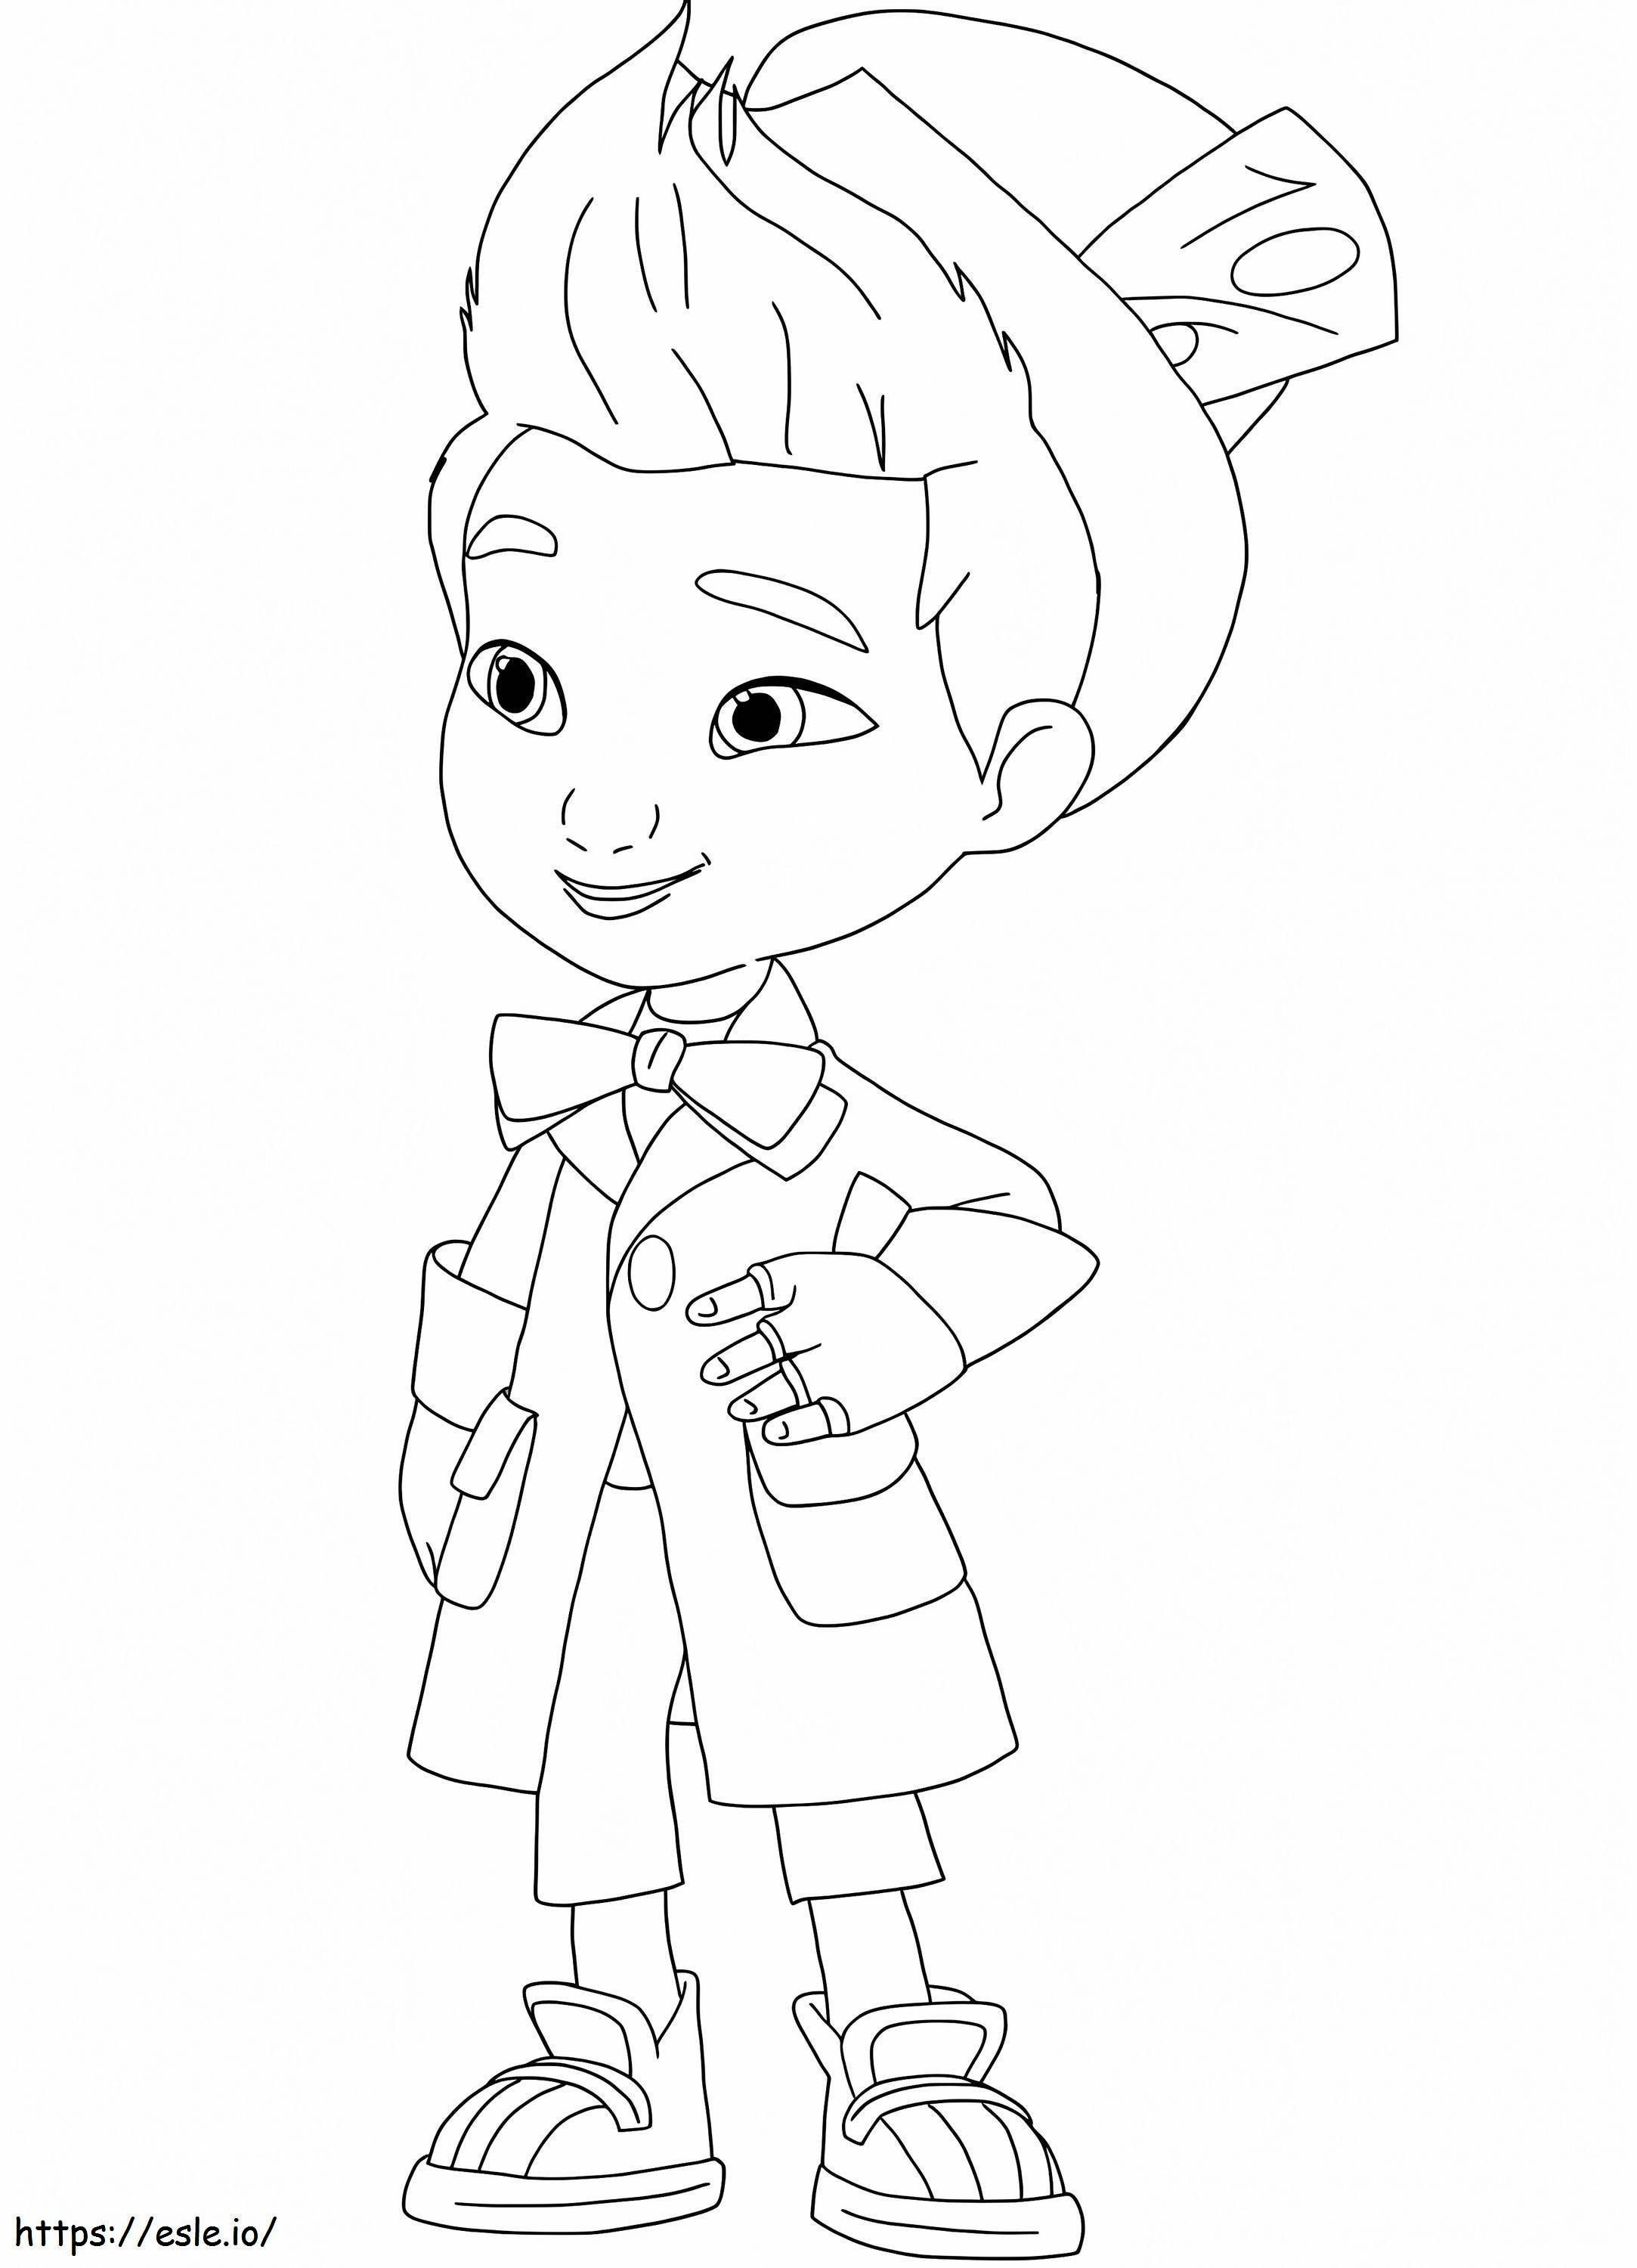 Hattie From Printable Alices Wonderland Bakery coloring page